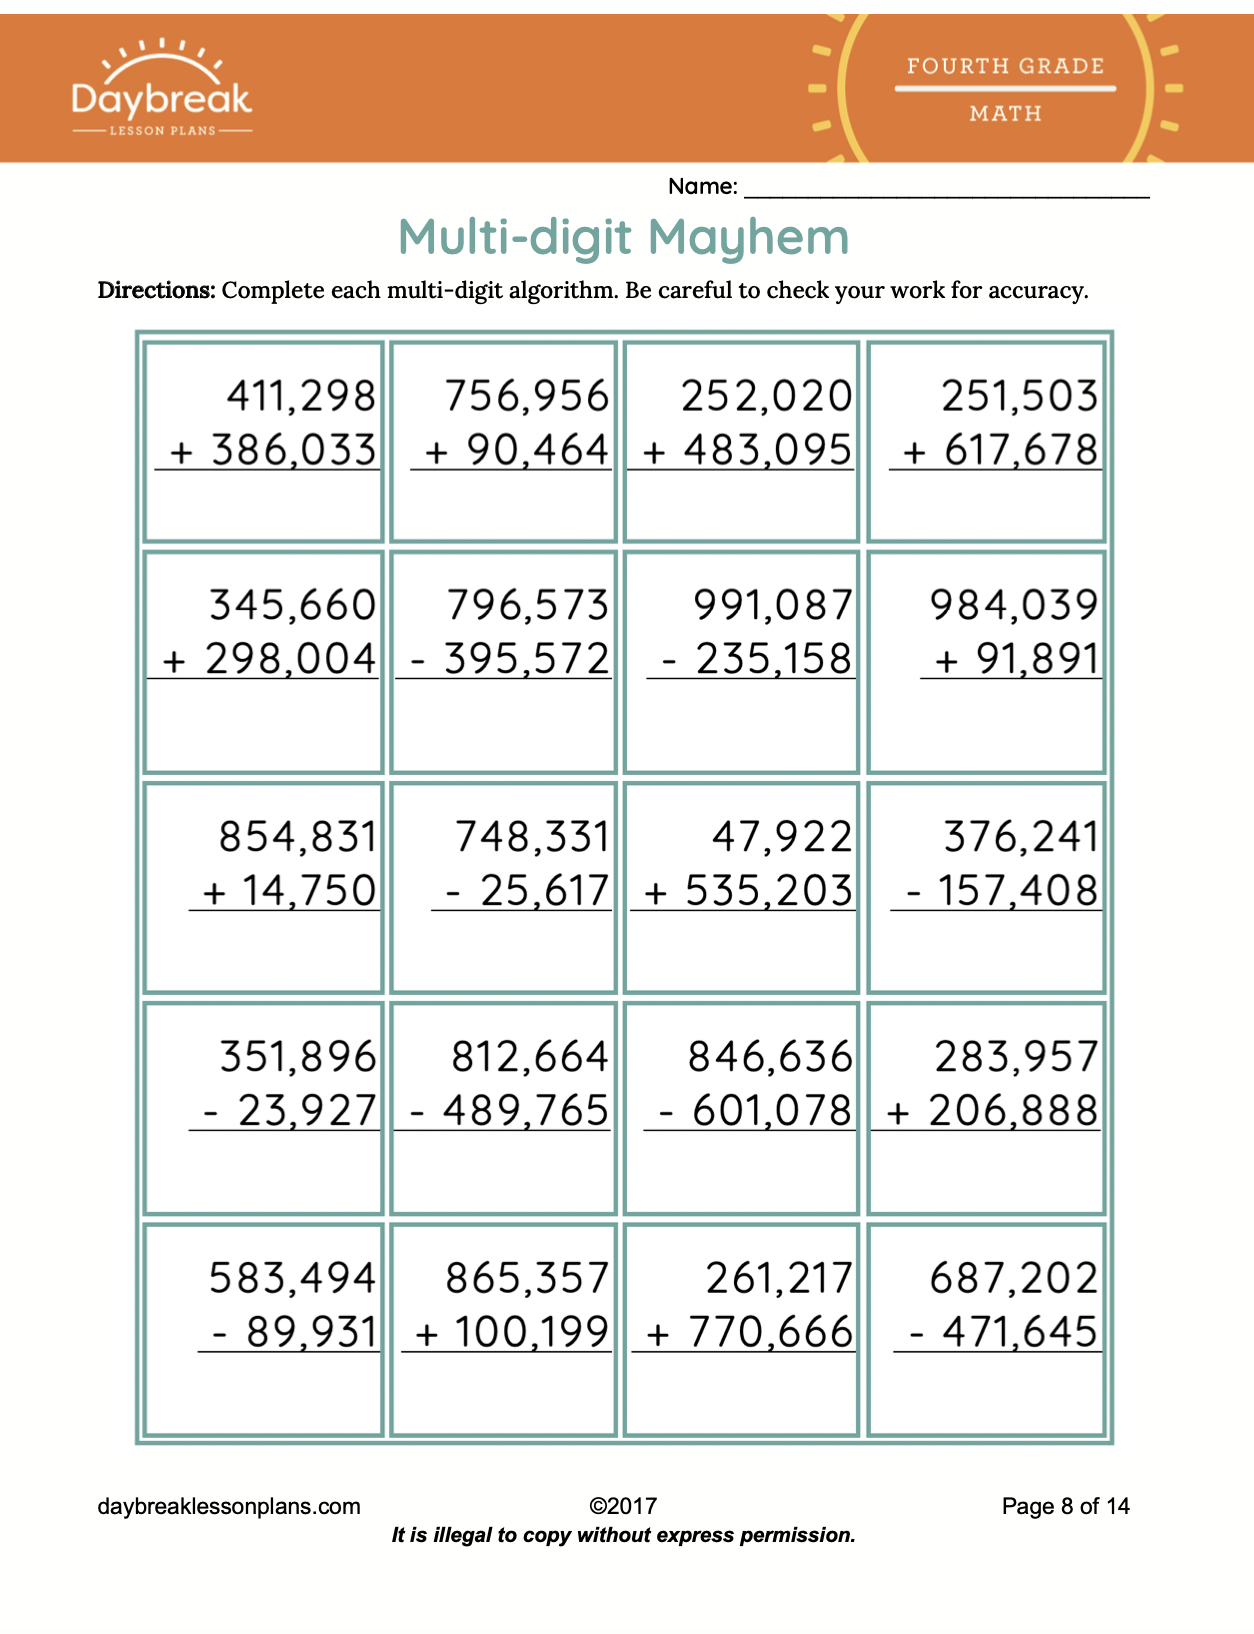 4th-grade-math-addition-subtraction-of-multi-digit-numbers